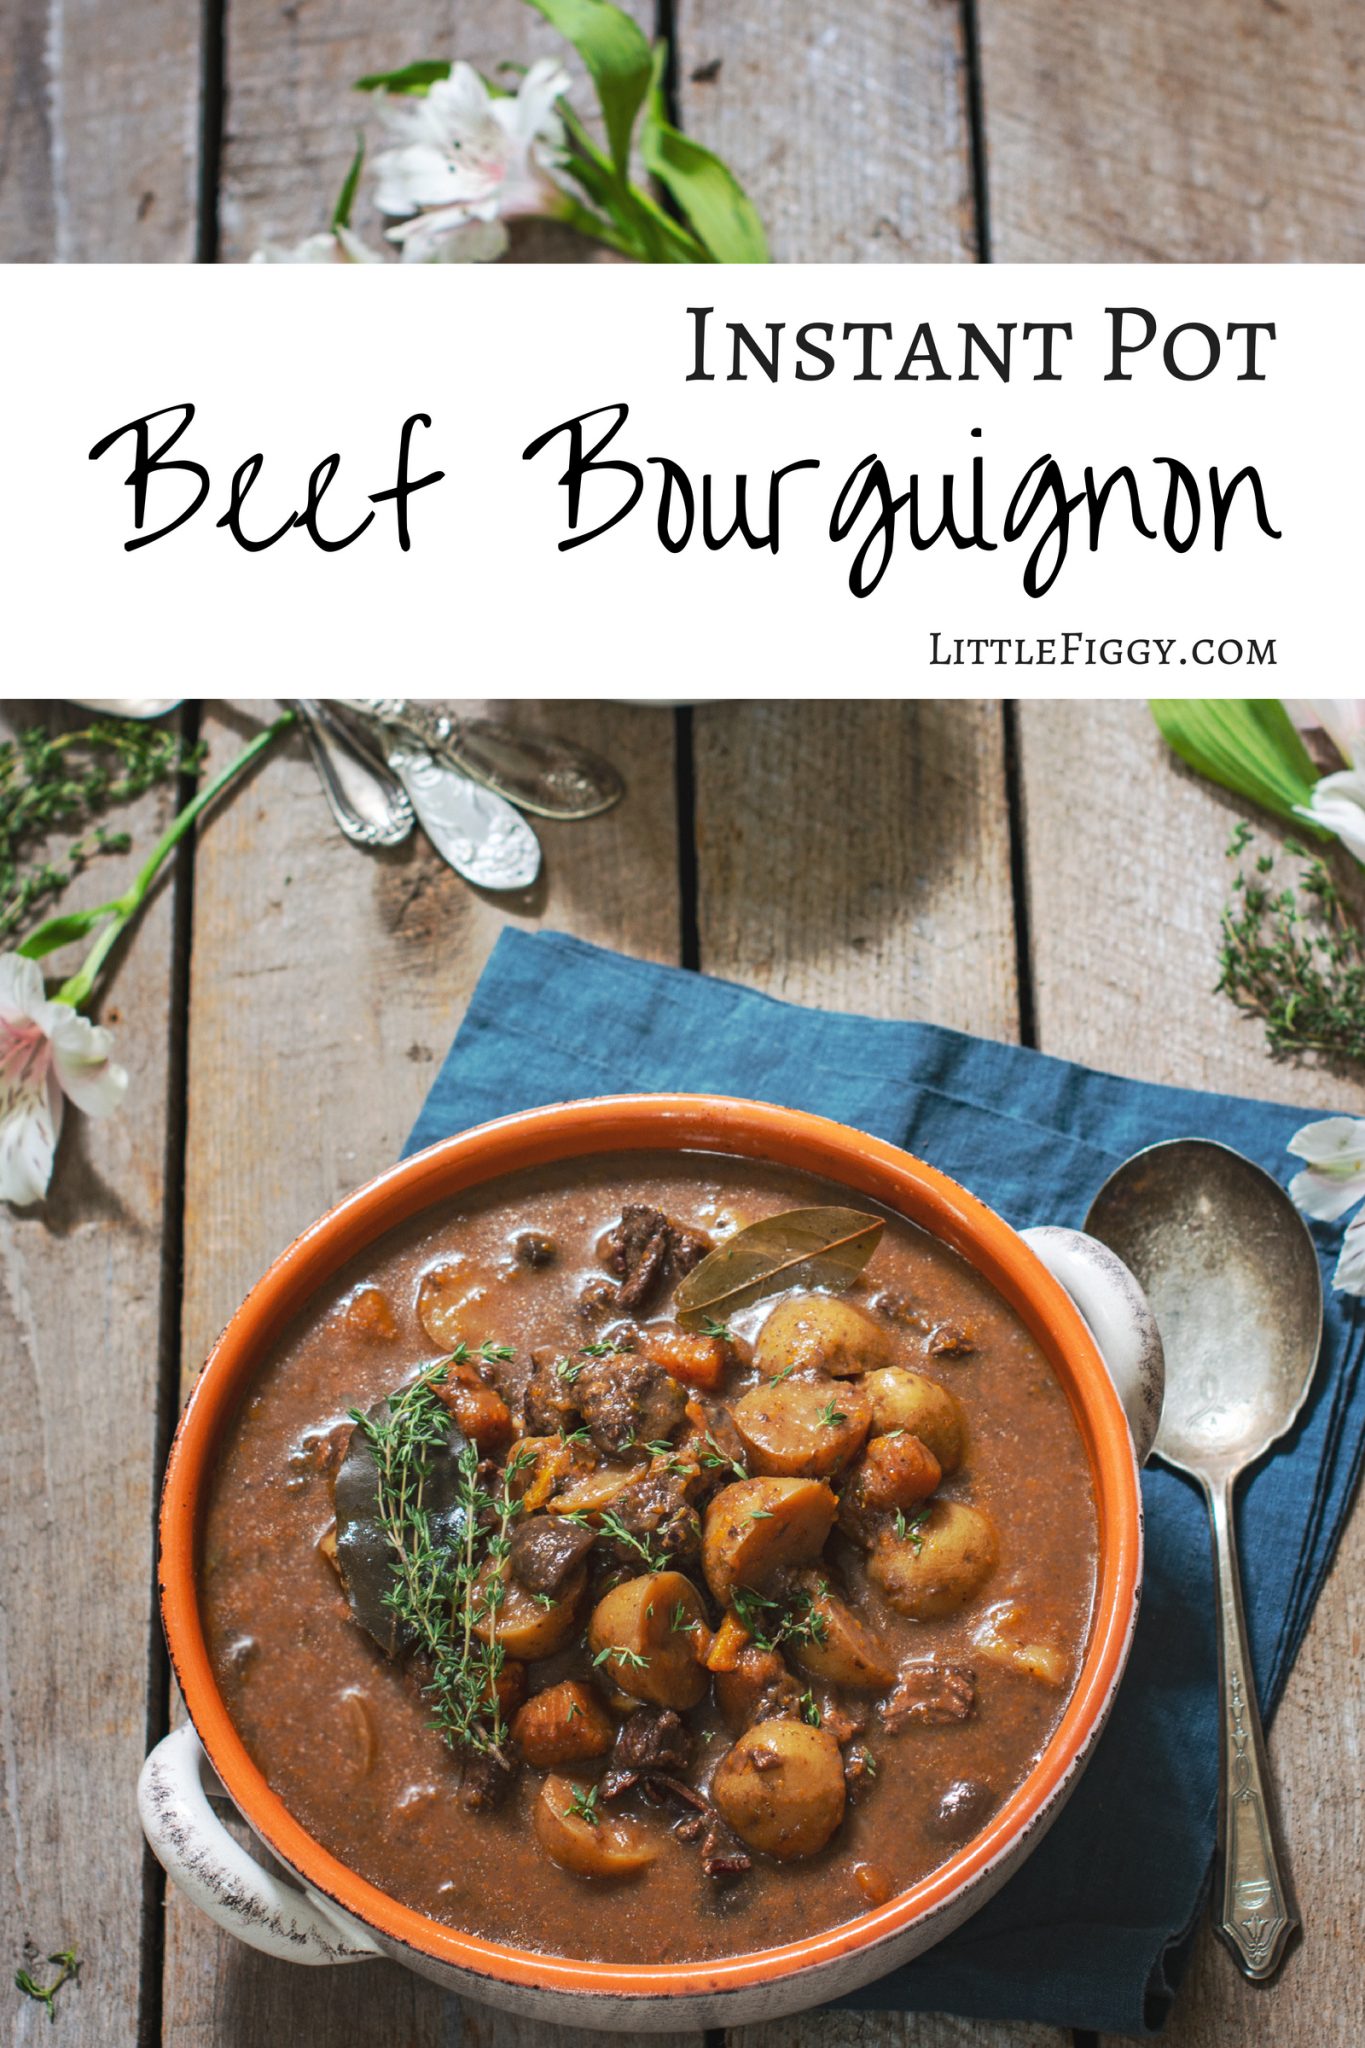 Instant Pot Beef Bourguignon in bowl on wood table with spoon